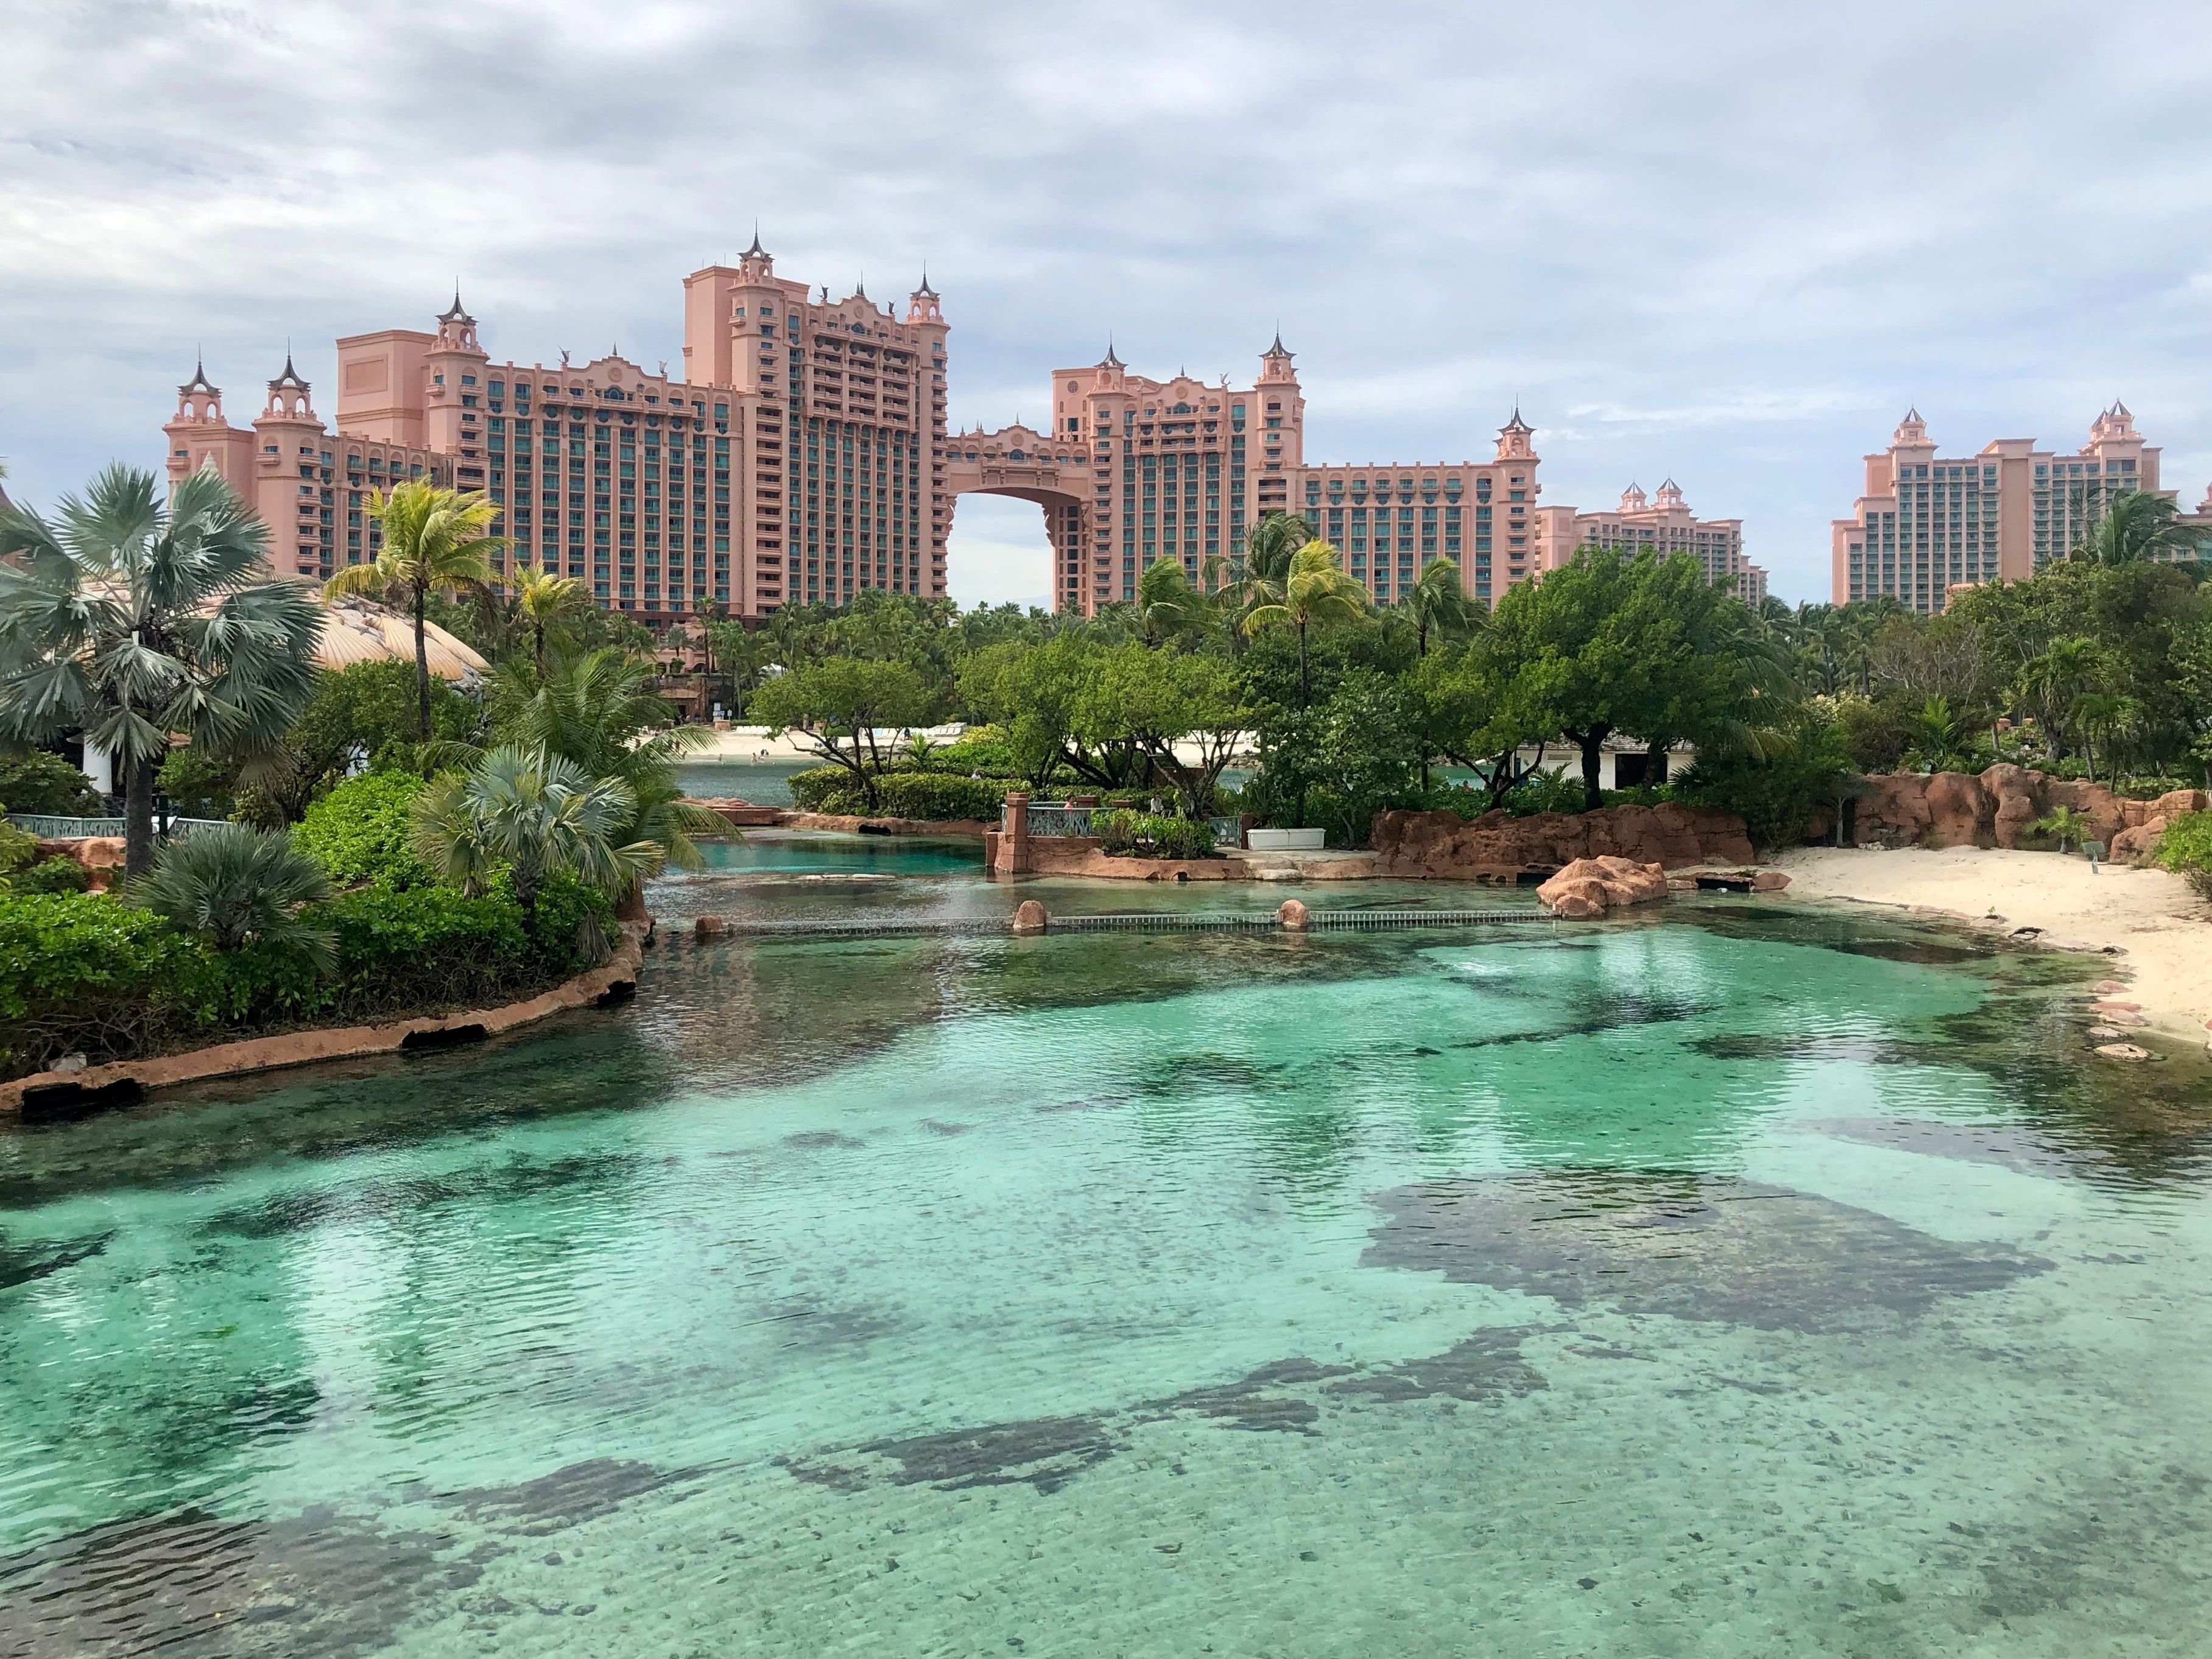 Clear, turquoise waters in Nassau, Bahamas framed by the impressive Atlantis Resort